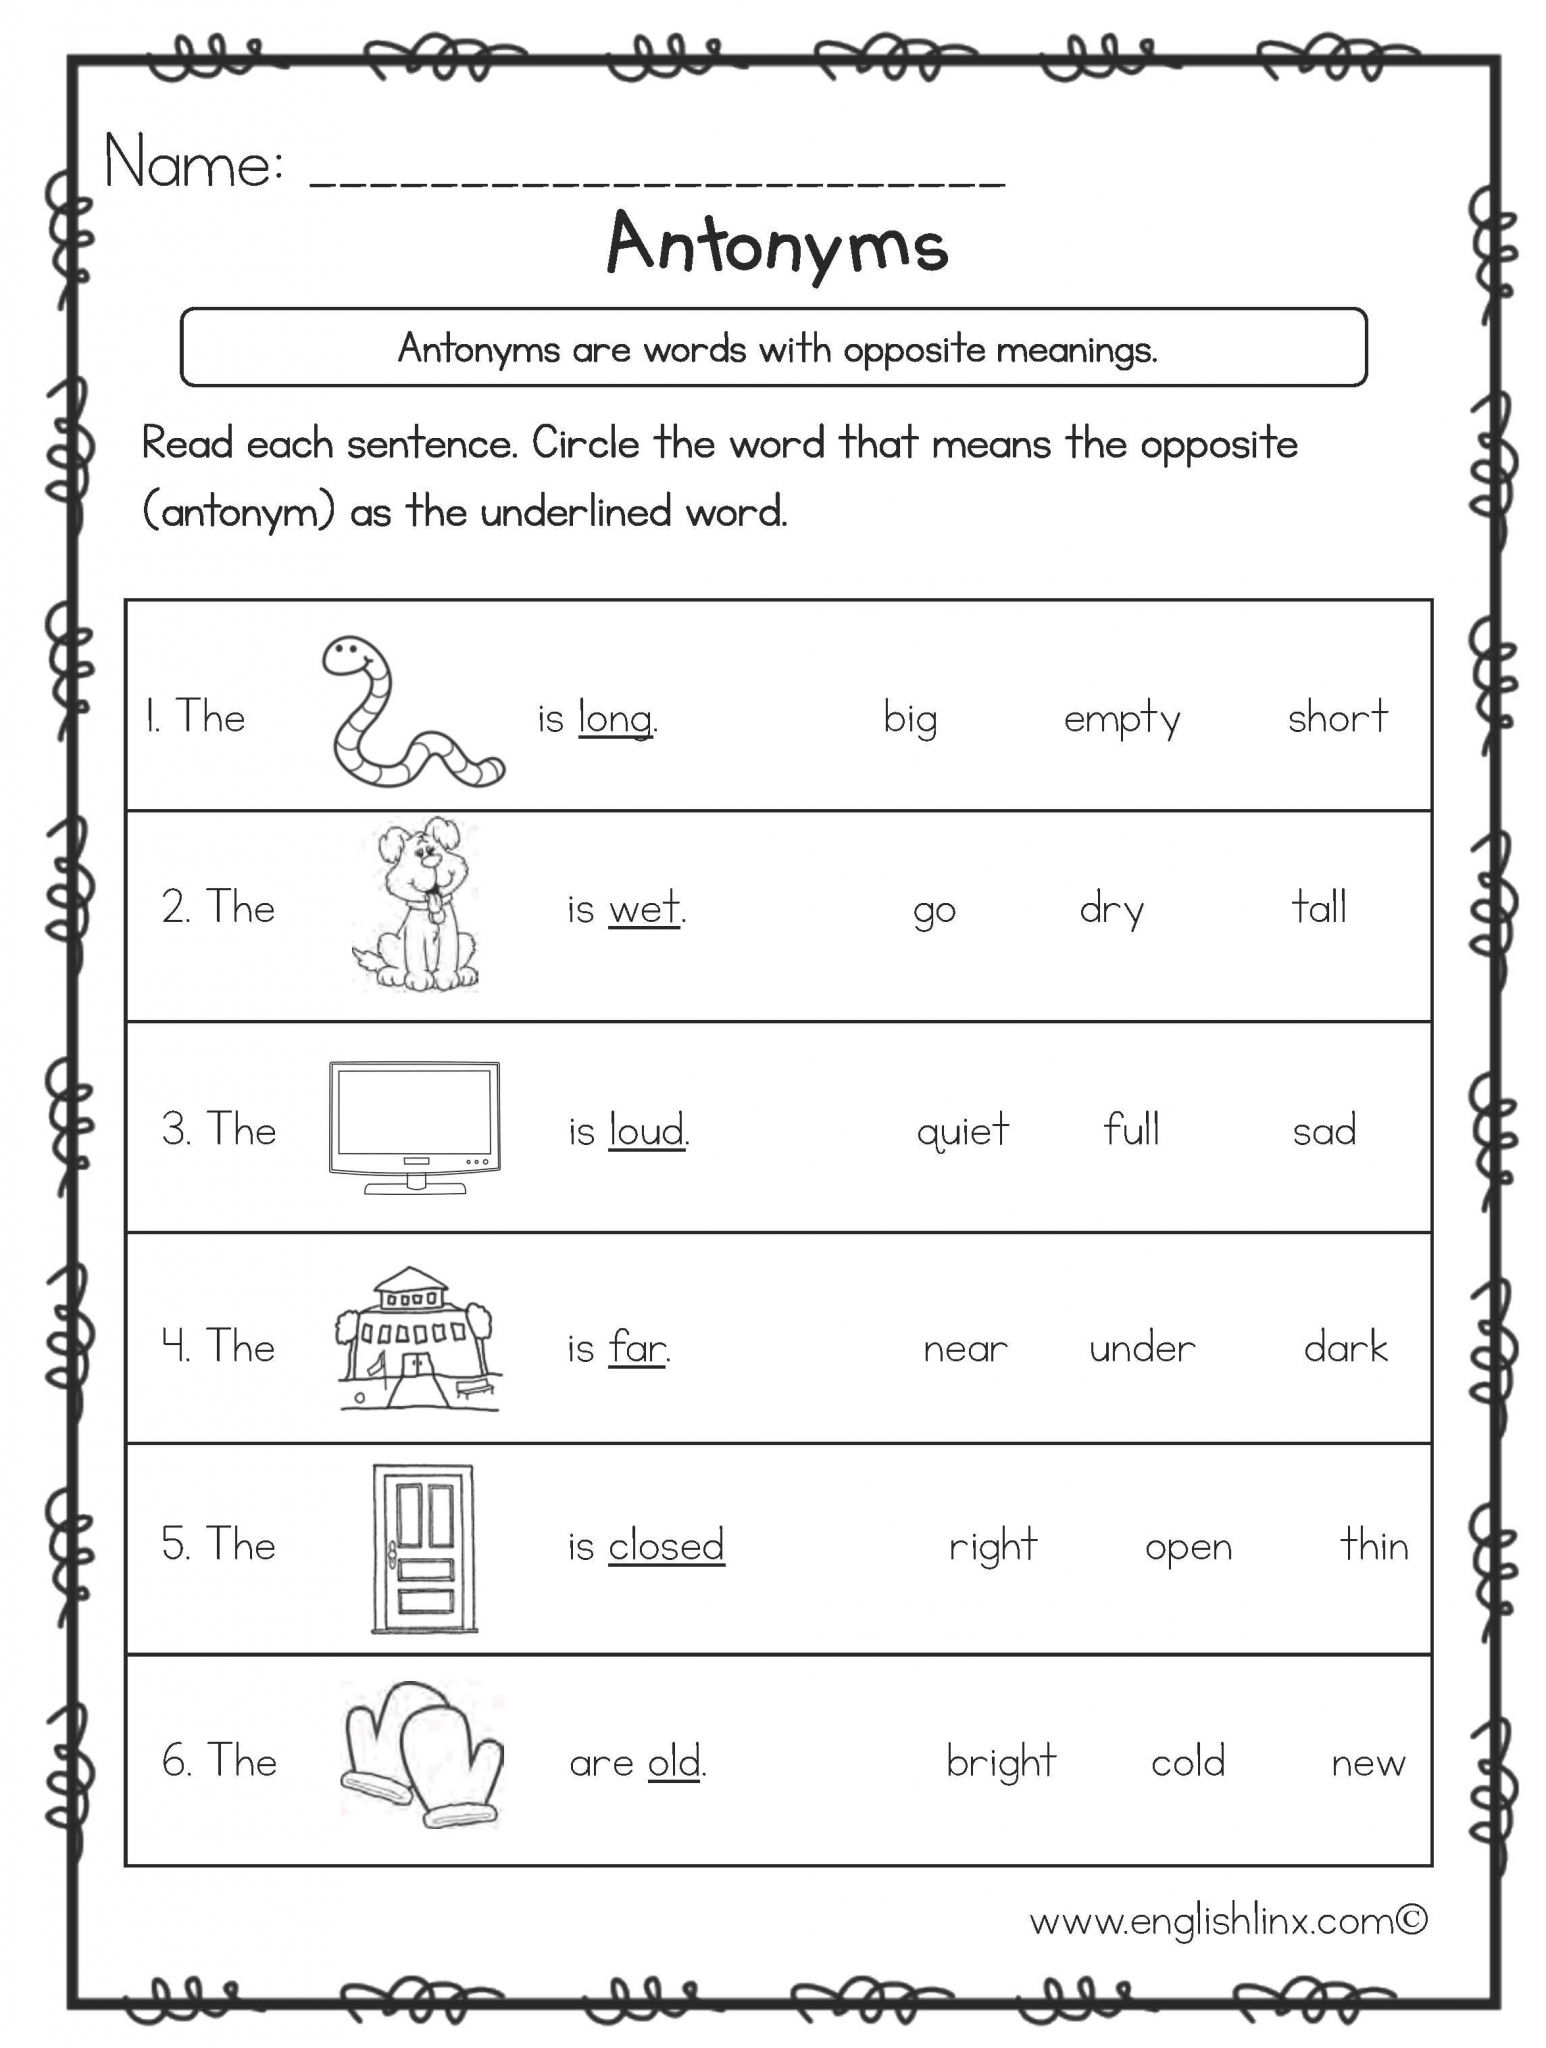 Growth Mindset Worksheet Pdf together with Opposite Antonyms Worksheets Great English tools